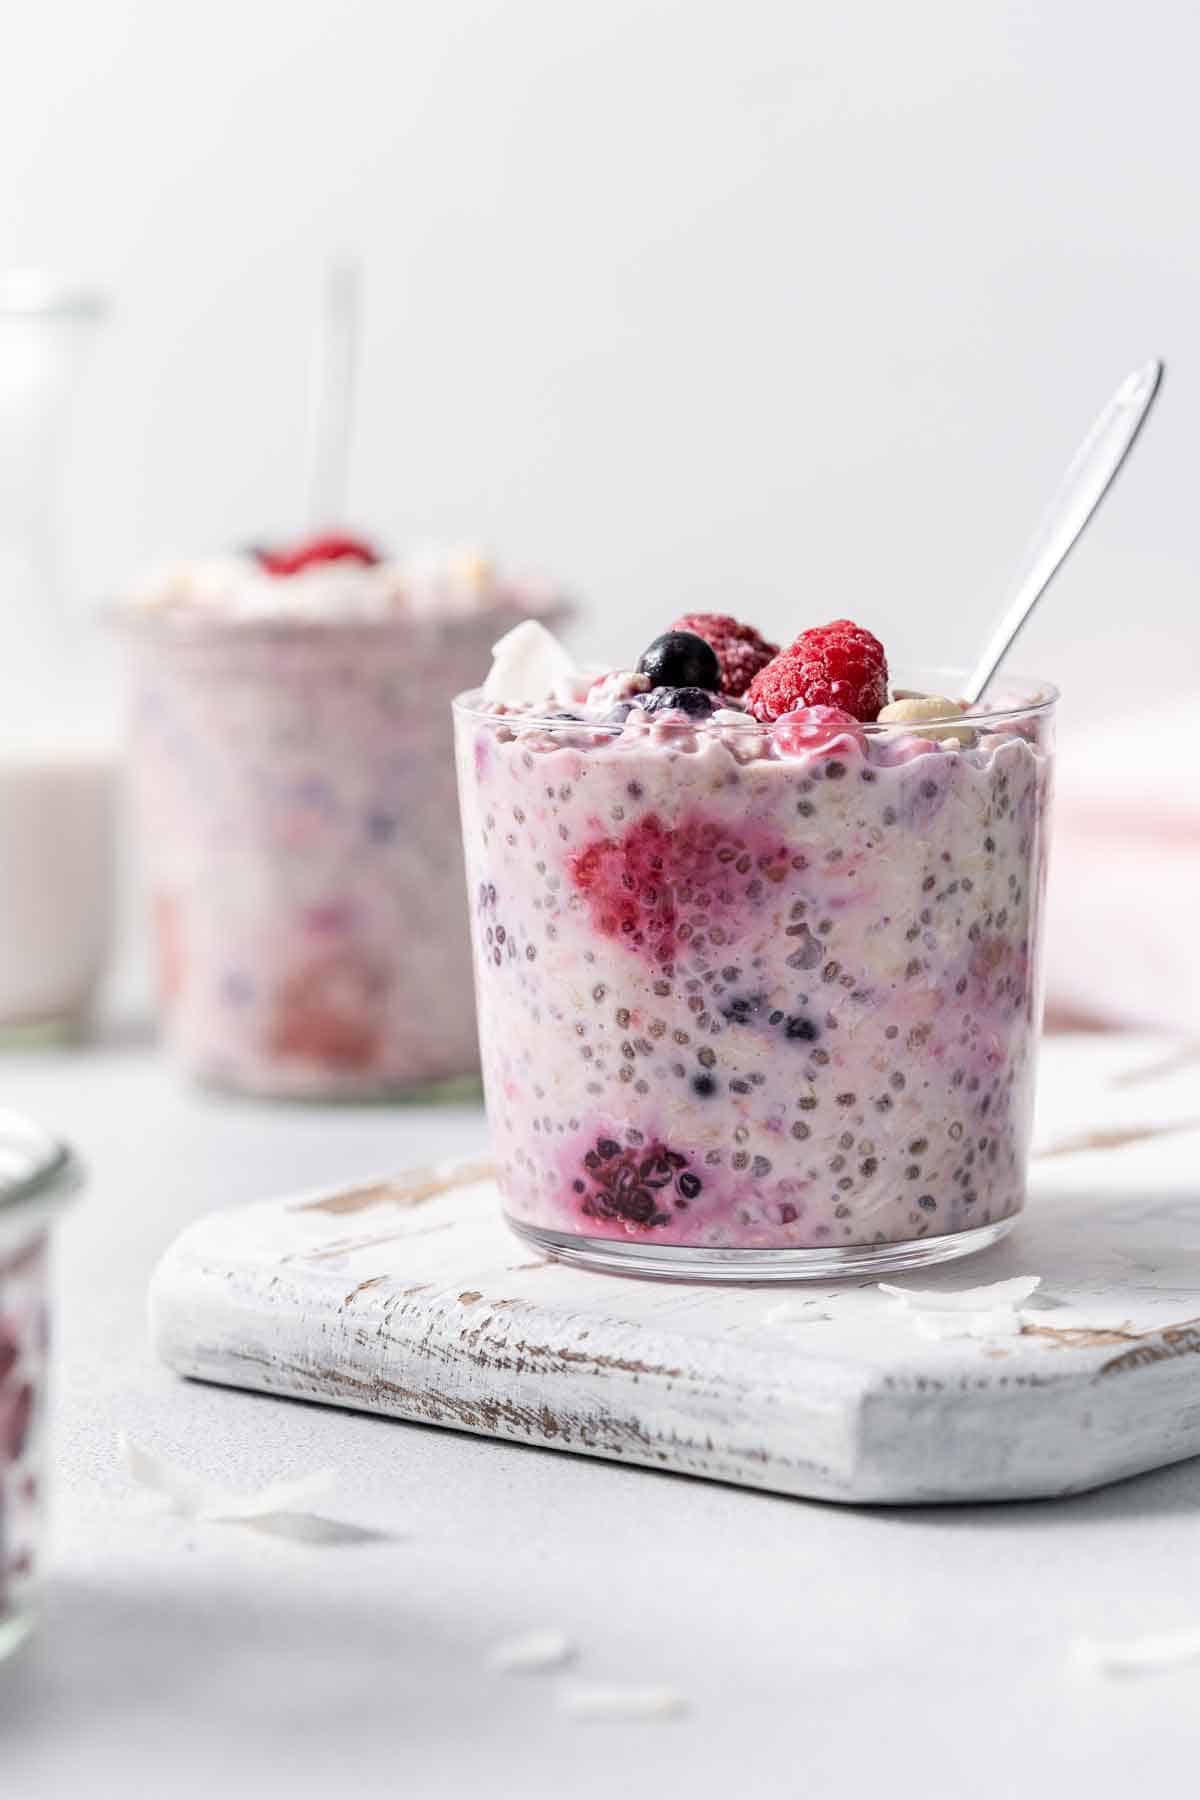 A glass of overnight oats with frozen fruit with a spoon inside with another jar out of focus in the back.